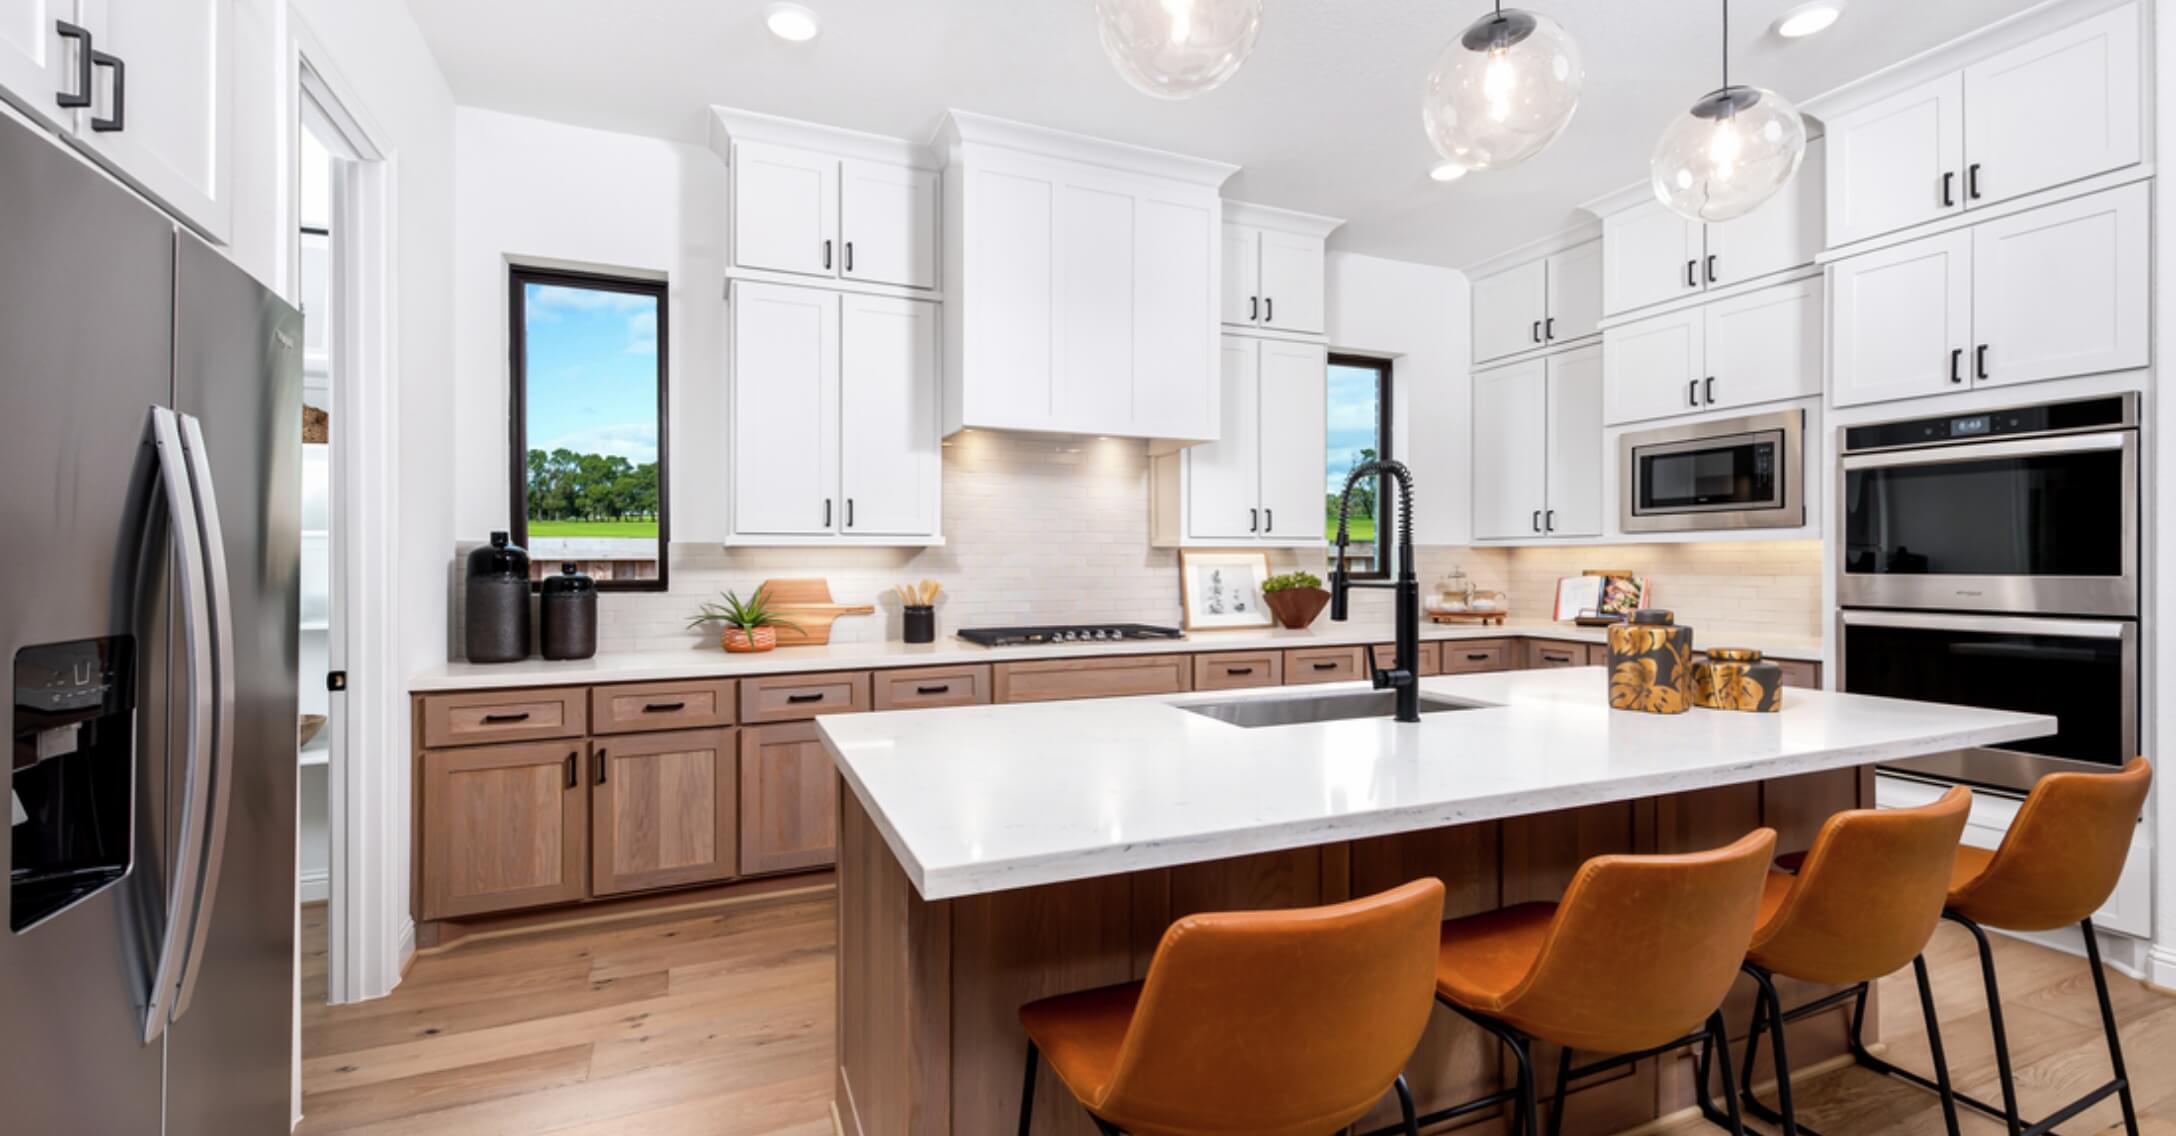 A kitchen with a center island and orange stools in new homes in New Braunfels.